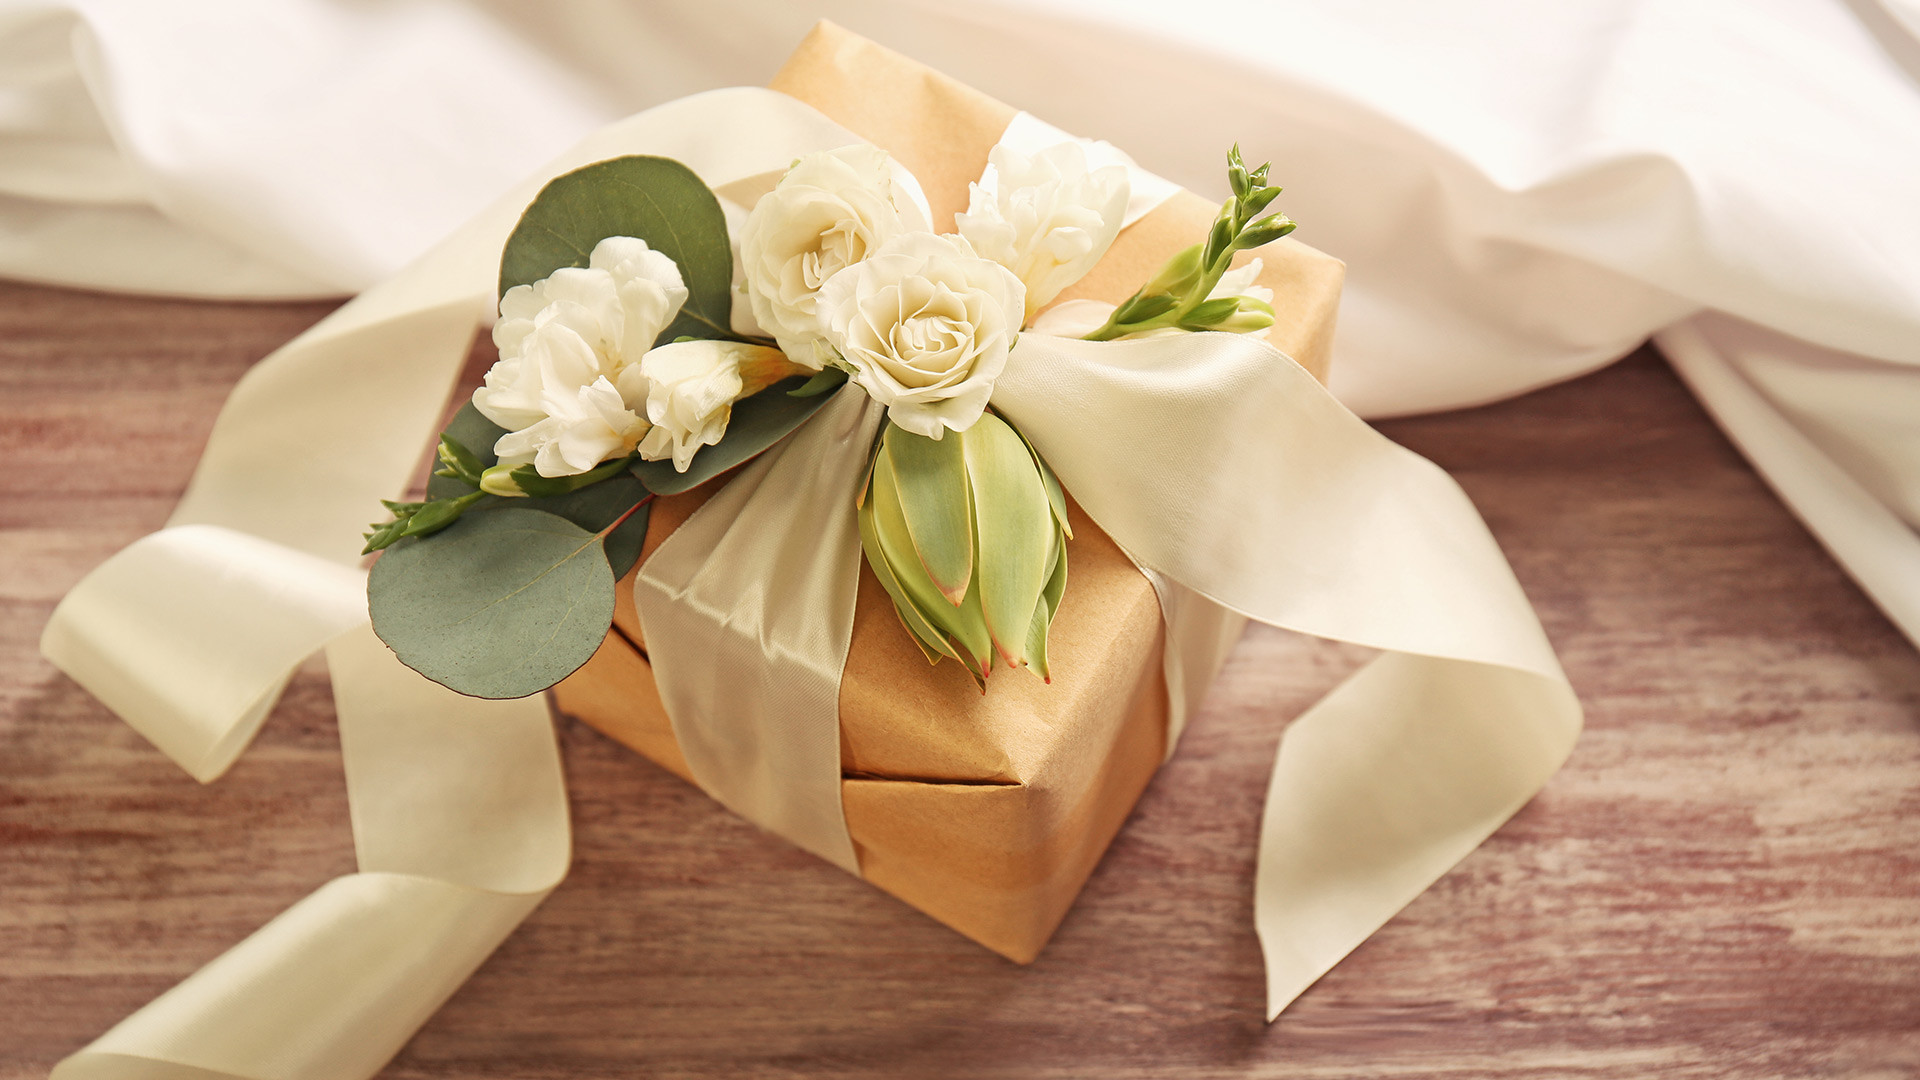 Wedding Gift Ideas For The Couple
 How to Choose the Perfect Wedding Gift For a Couple